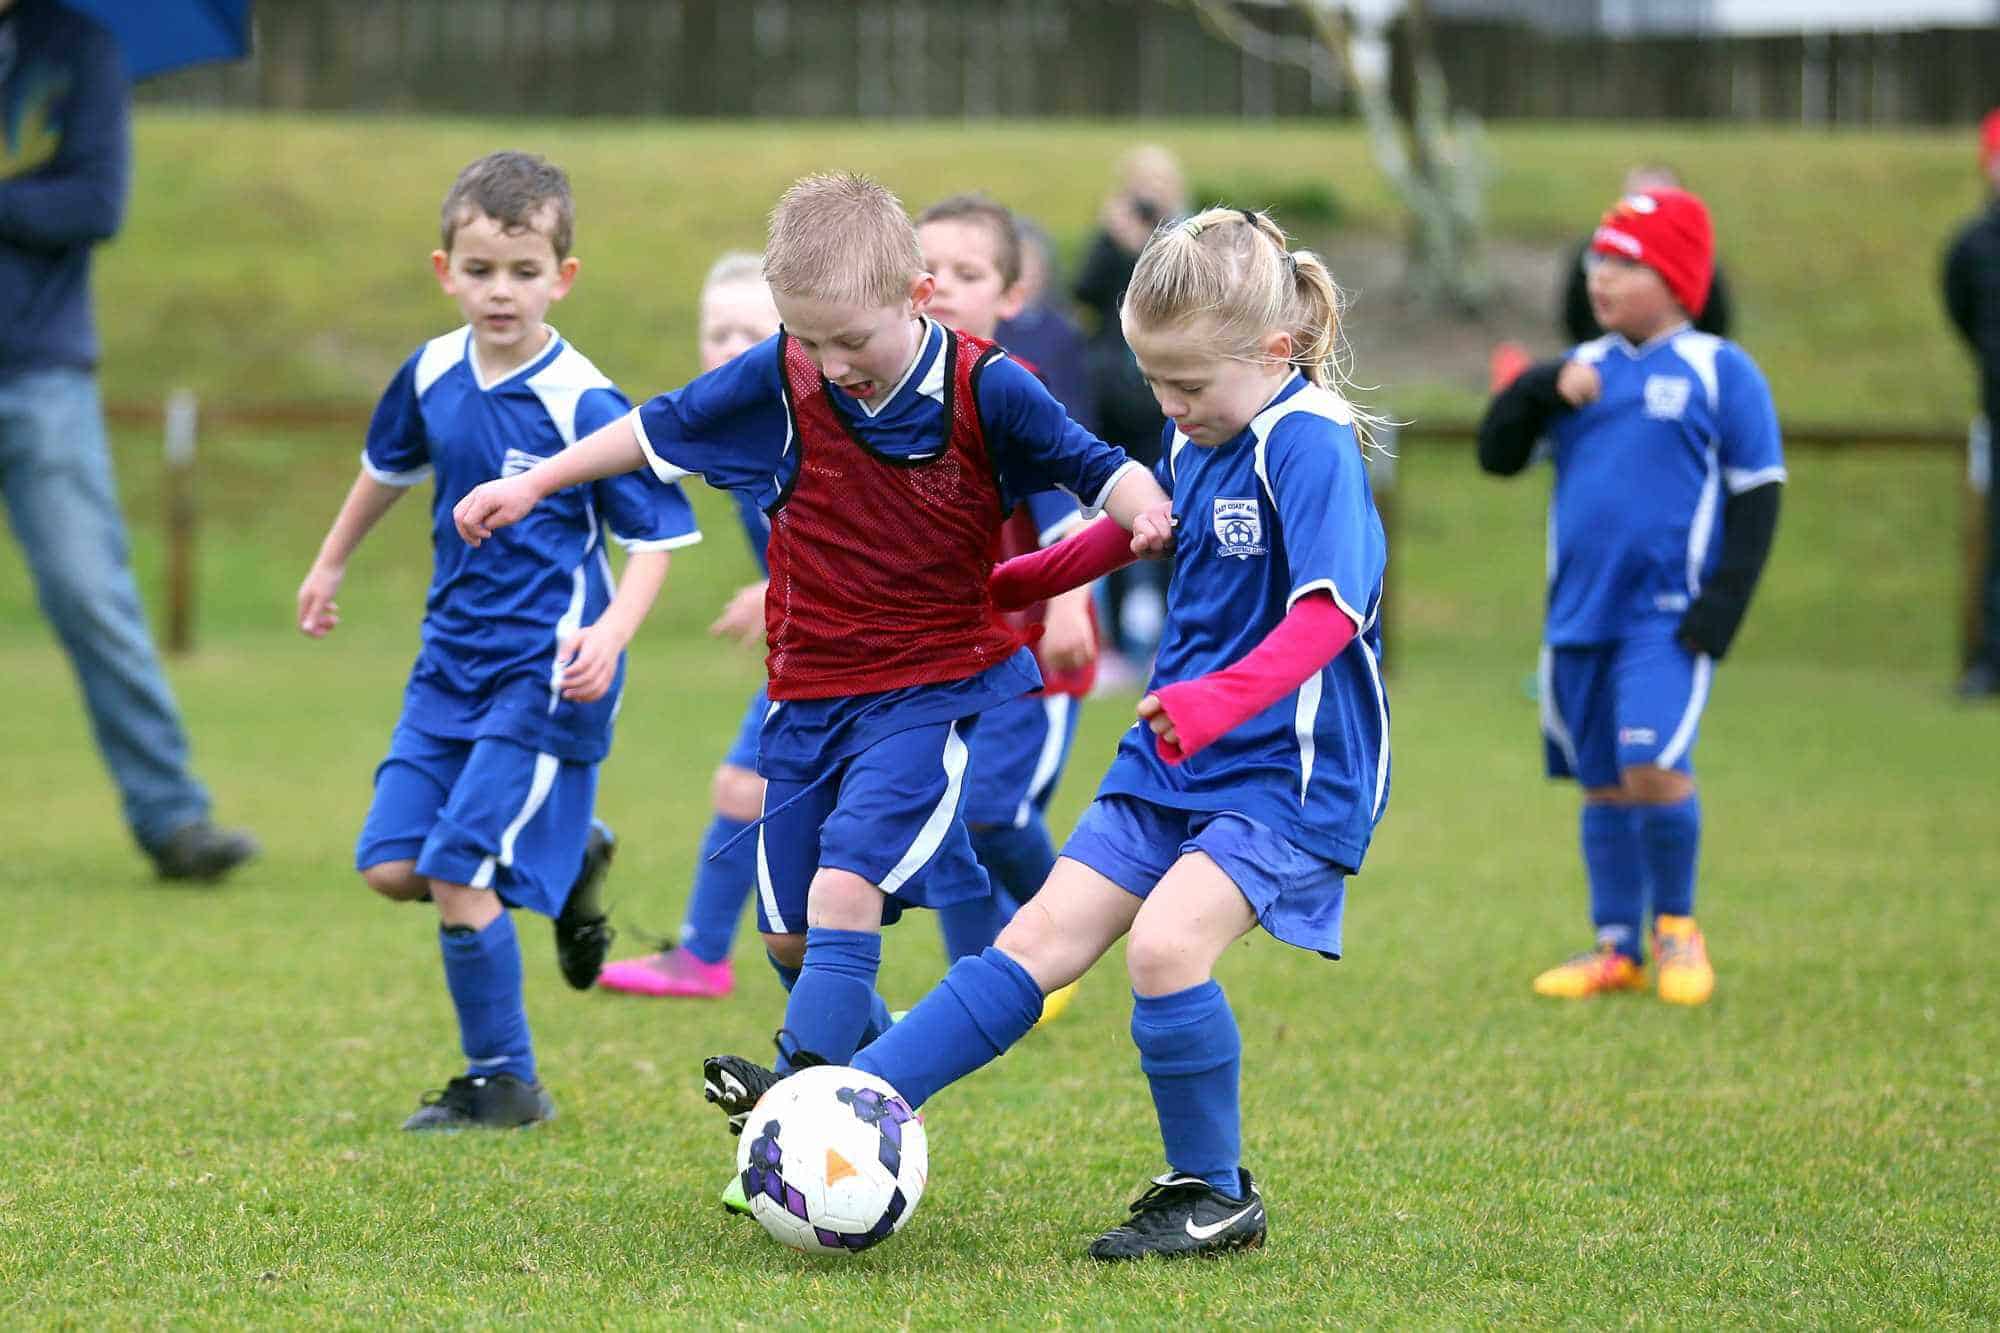 When Do Young Soccer Players Risk Head Injuries?